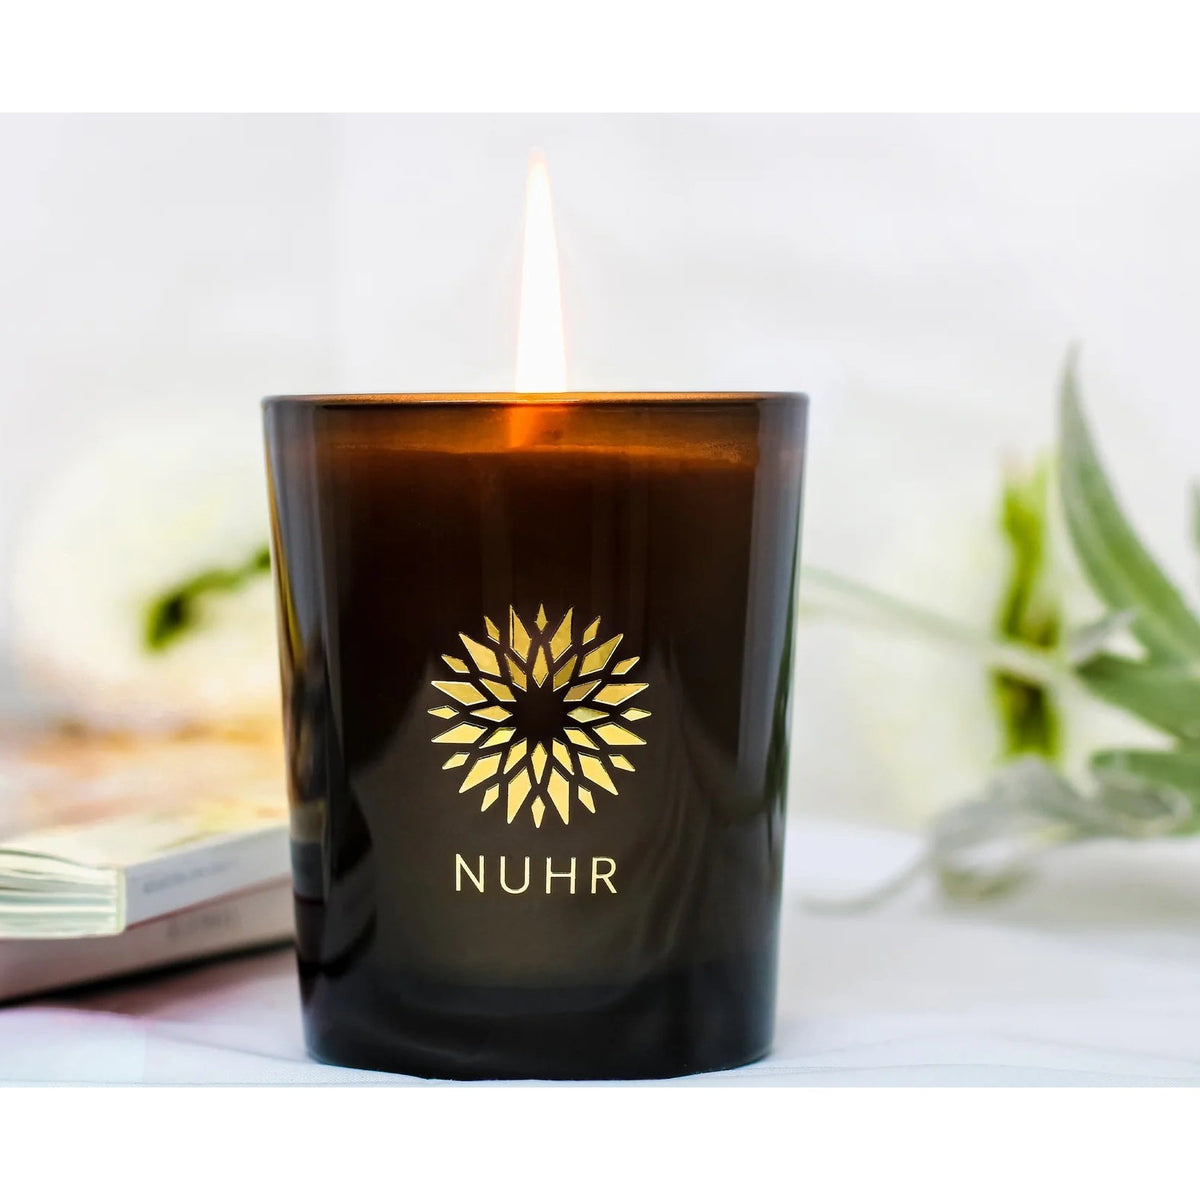 Nuhr Oud Woods Aroma Candle